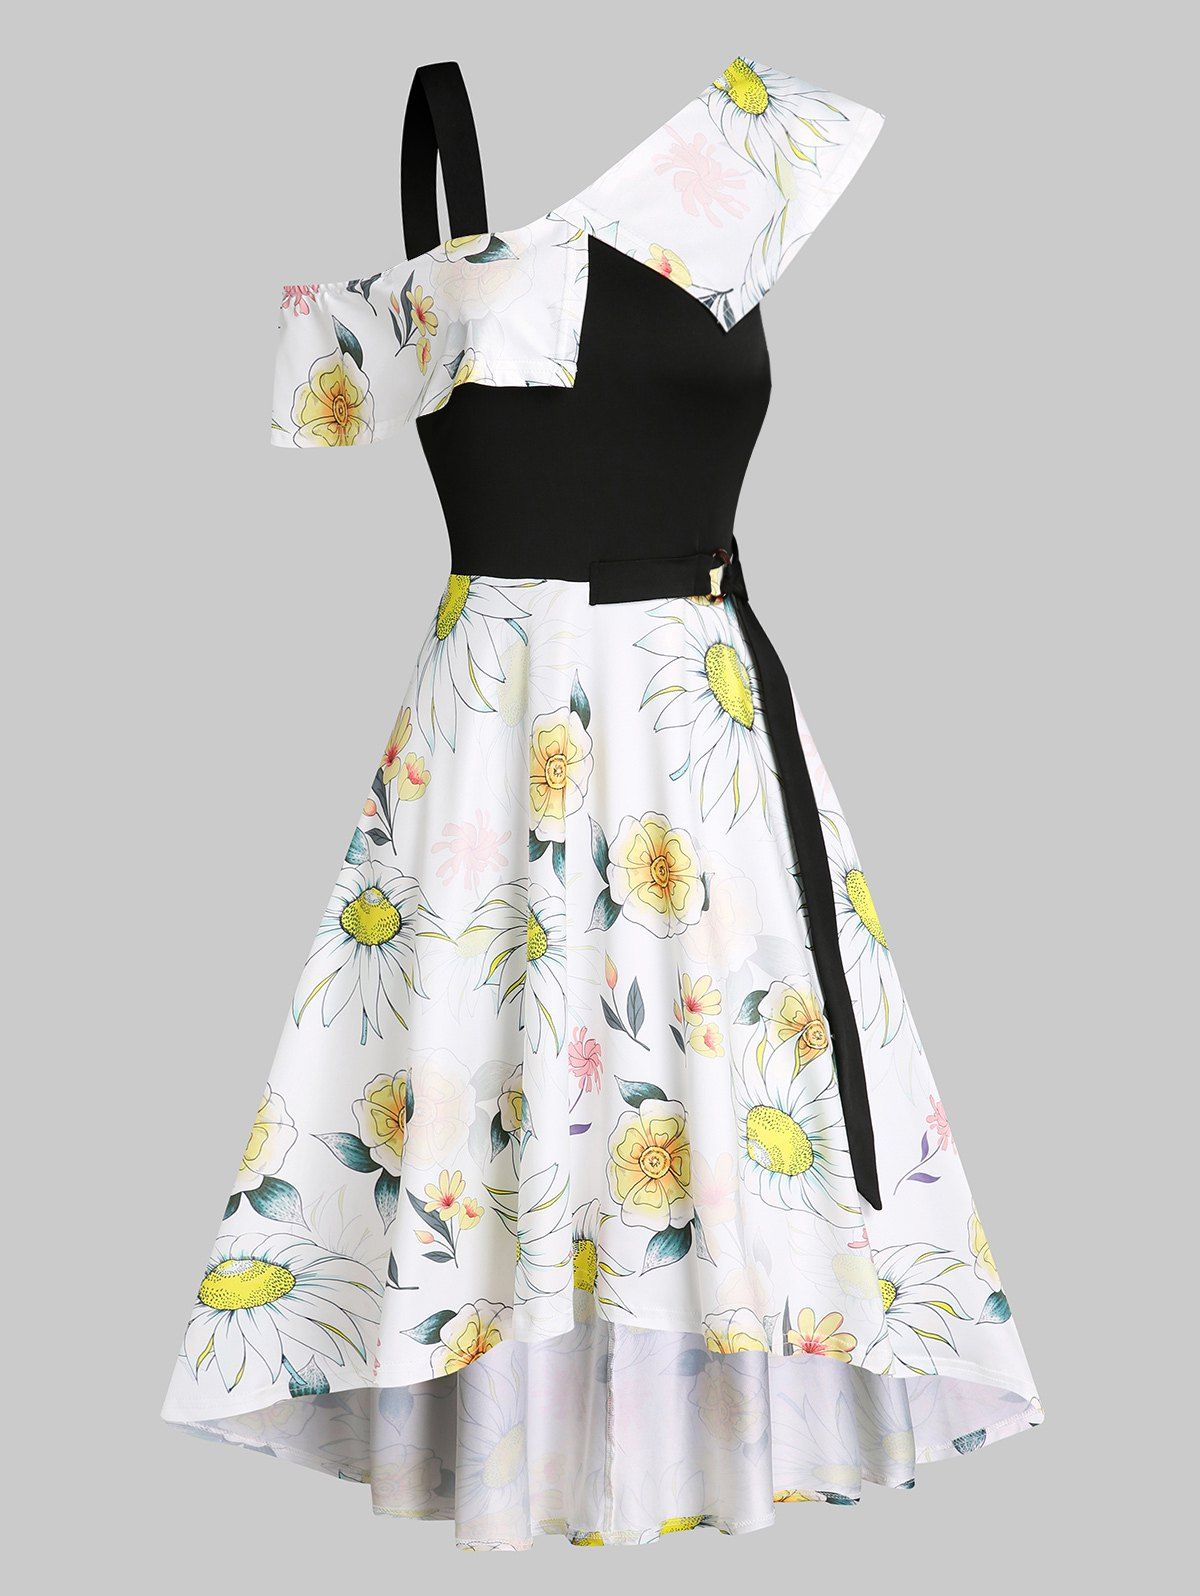 Vacation Printed Sunflower O Ring Belt Skew Neck A Line High Low Dress - WHITE 3XL